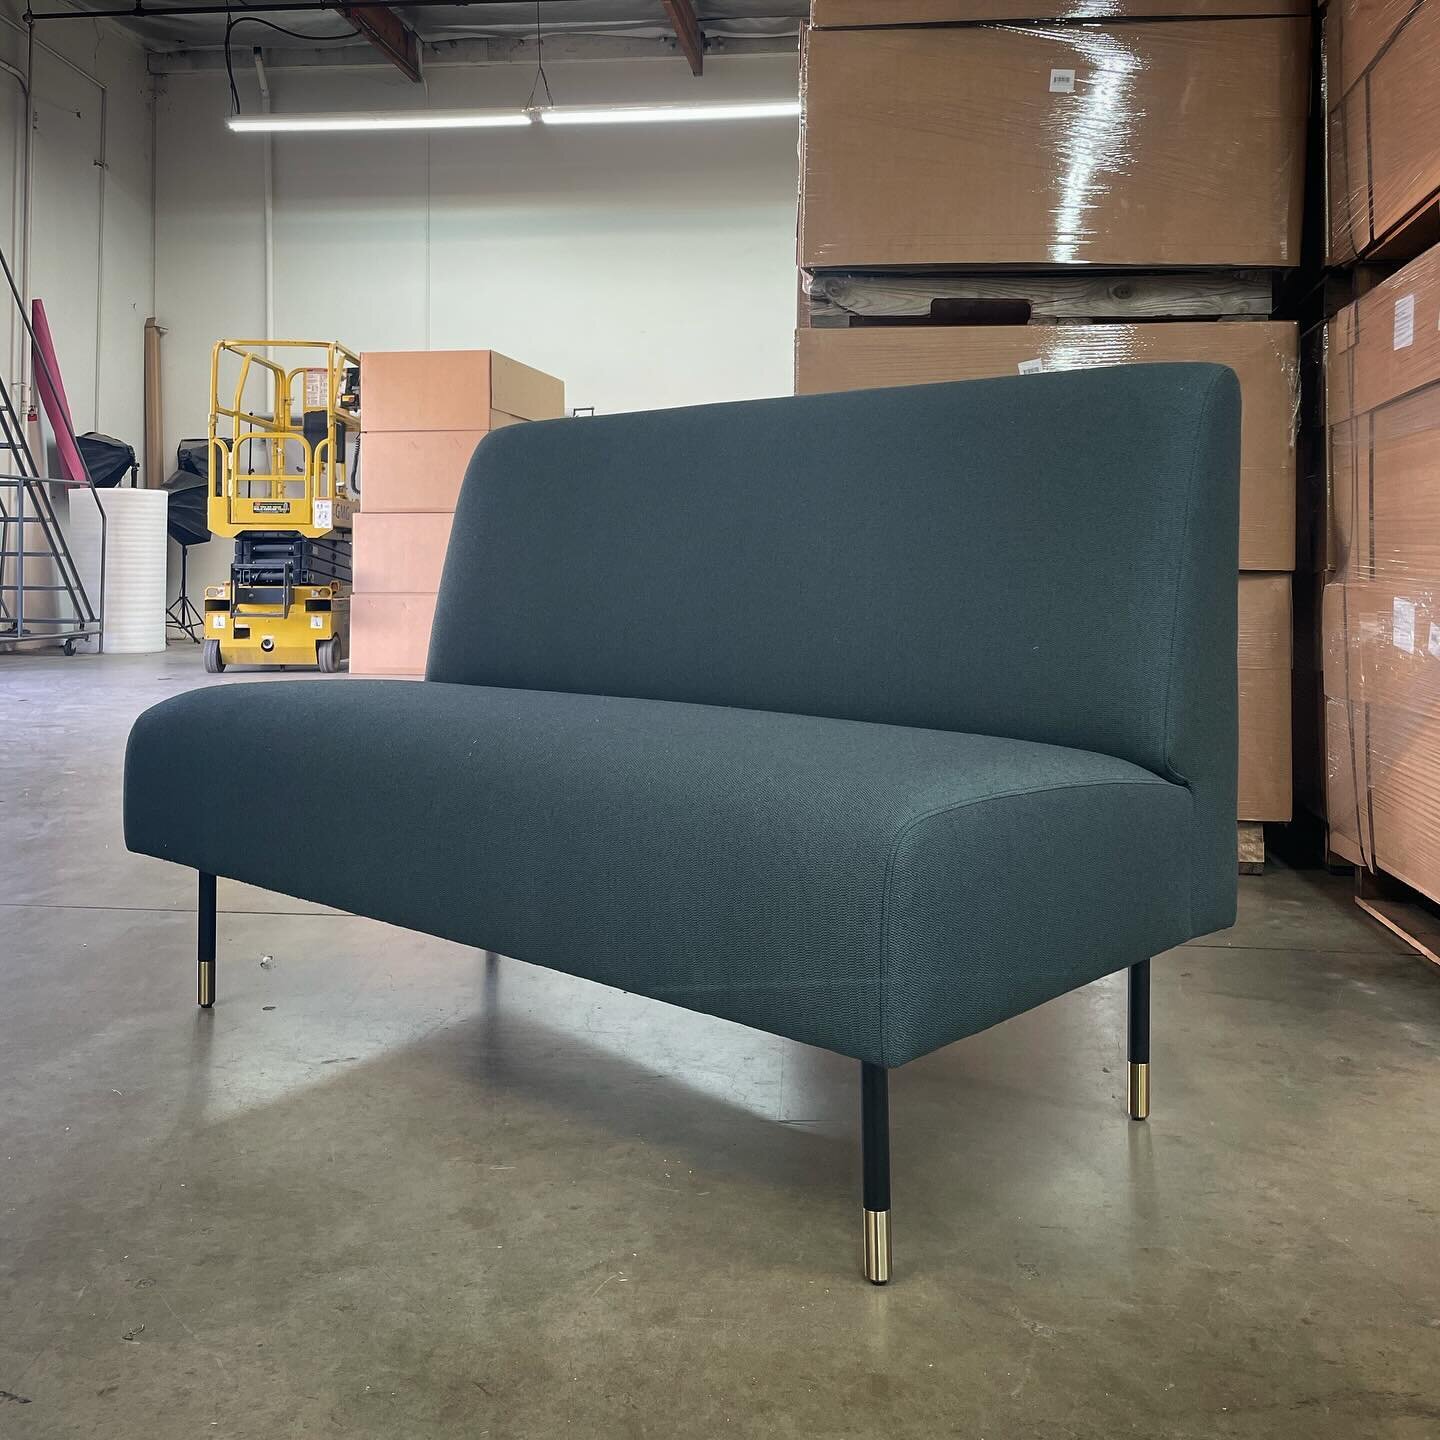 The versatile Rally banquette is standing by to make group seating, dining, and working a breeze. Here, shown with a simple tight back, our standard brushed brass sabots, and customer&rsquo;s own material for upholstery. #workplacedesign #customfurni